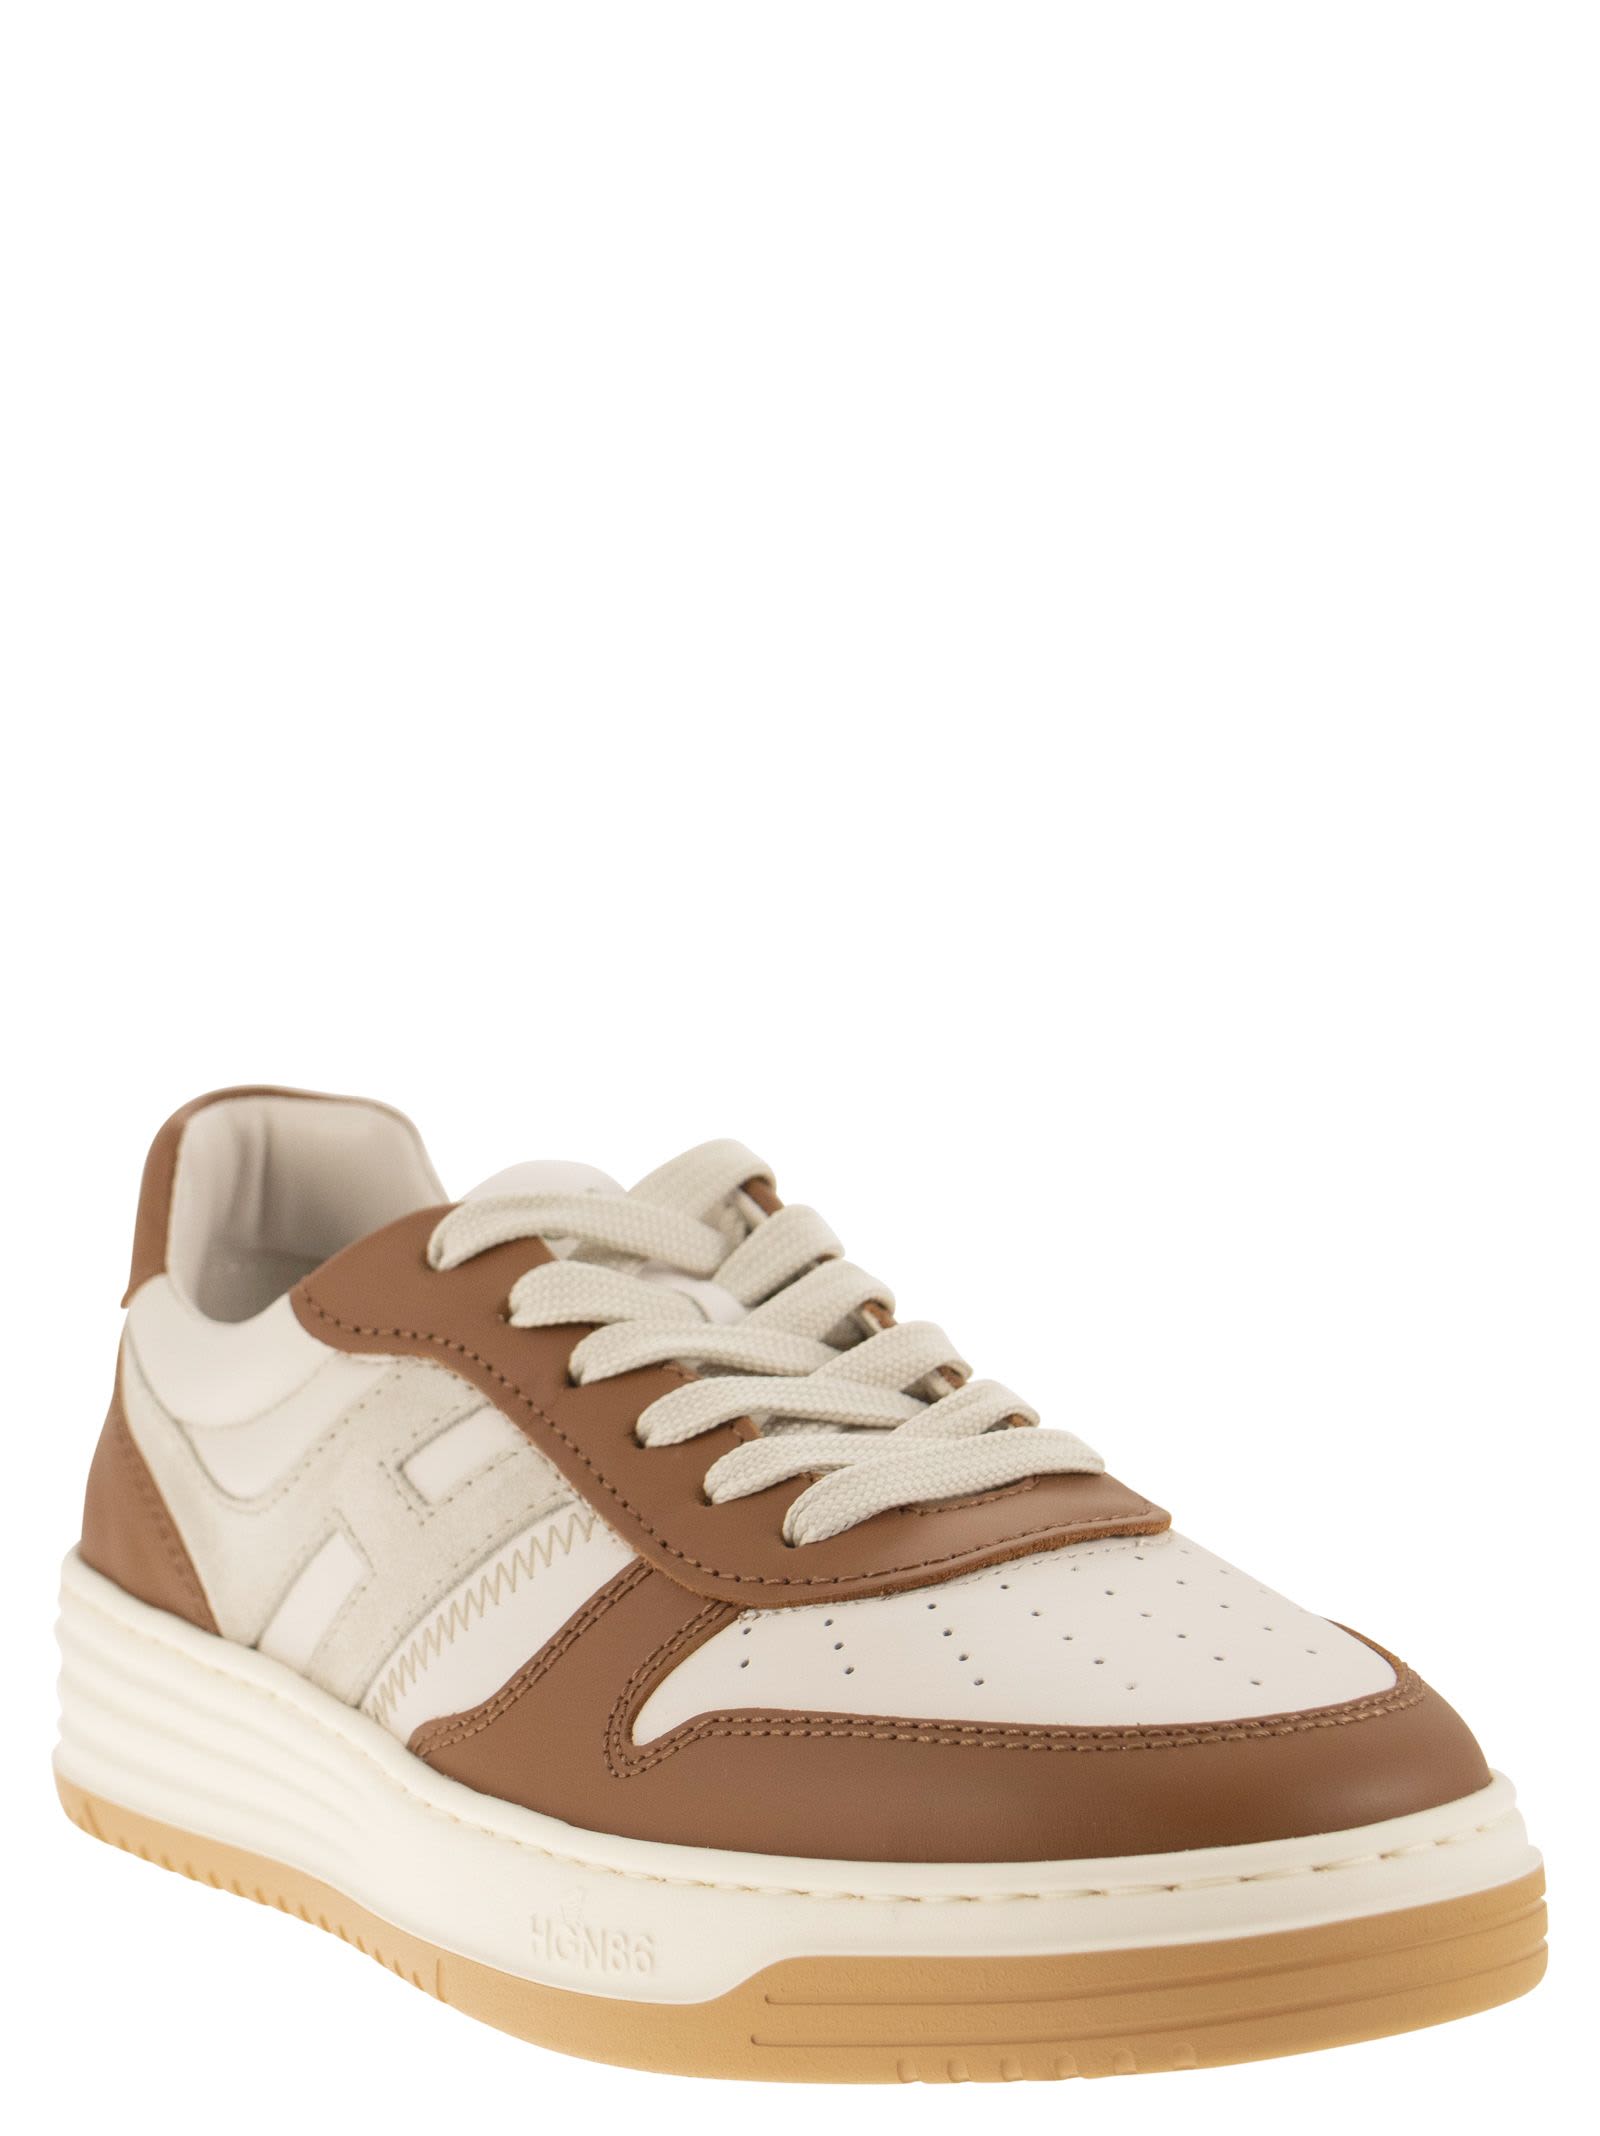 Shop Hogan H630 Leather Sneakers In J